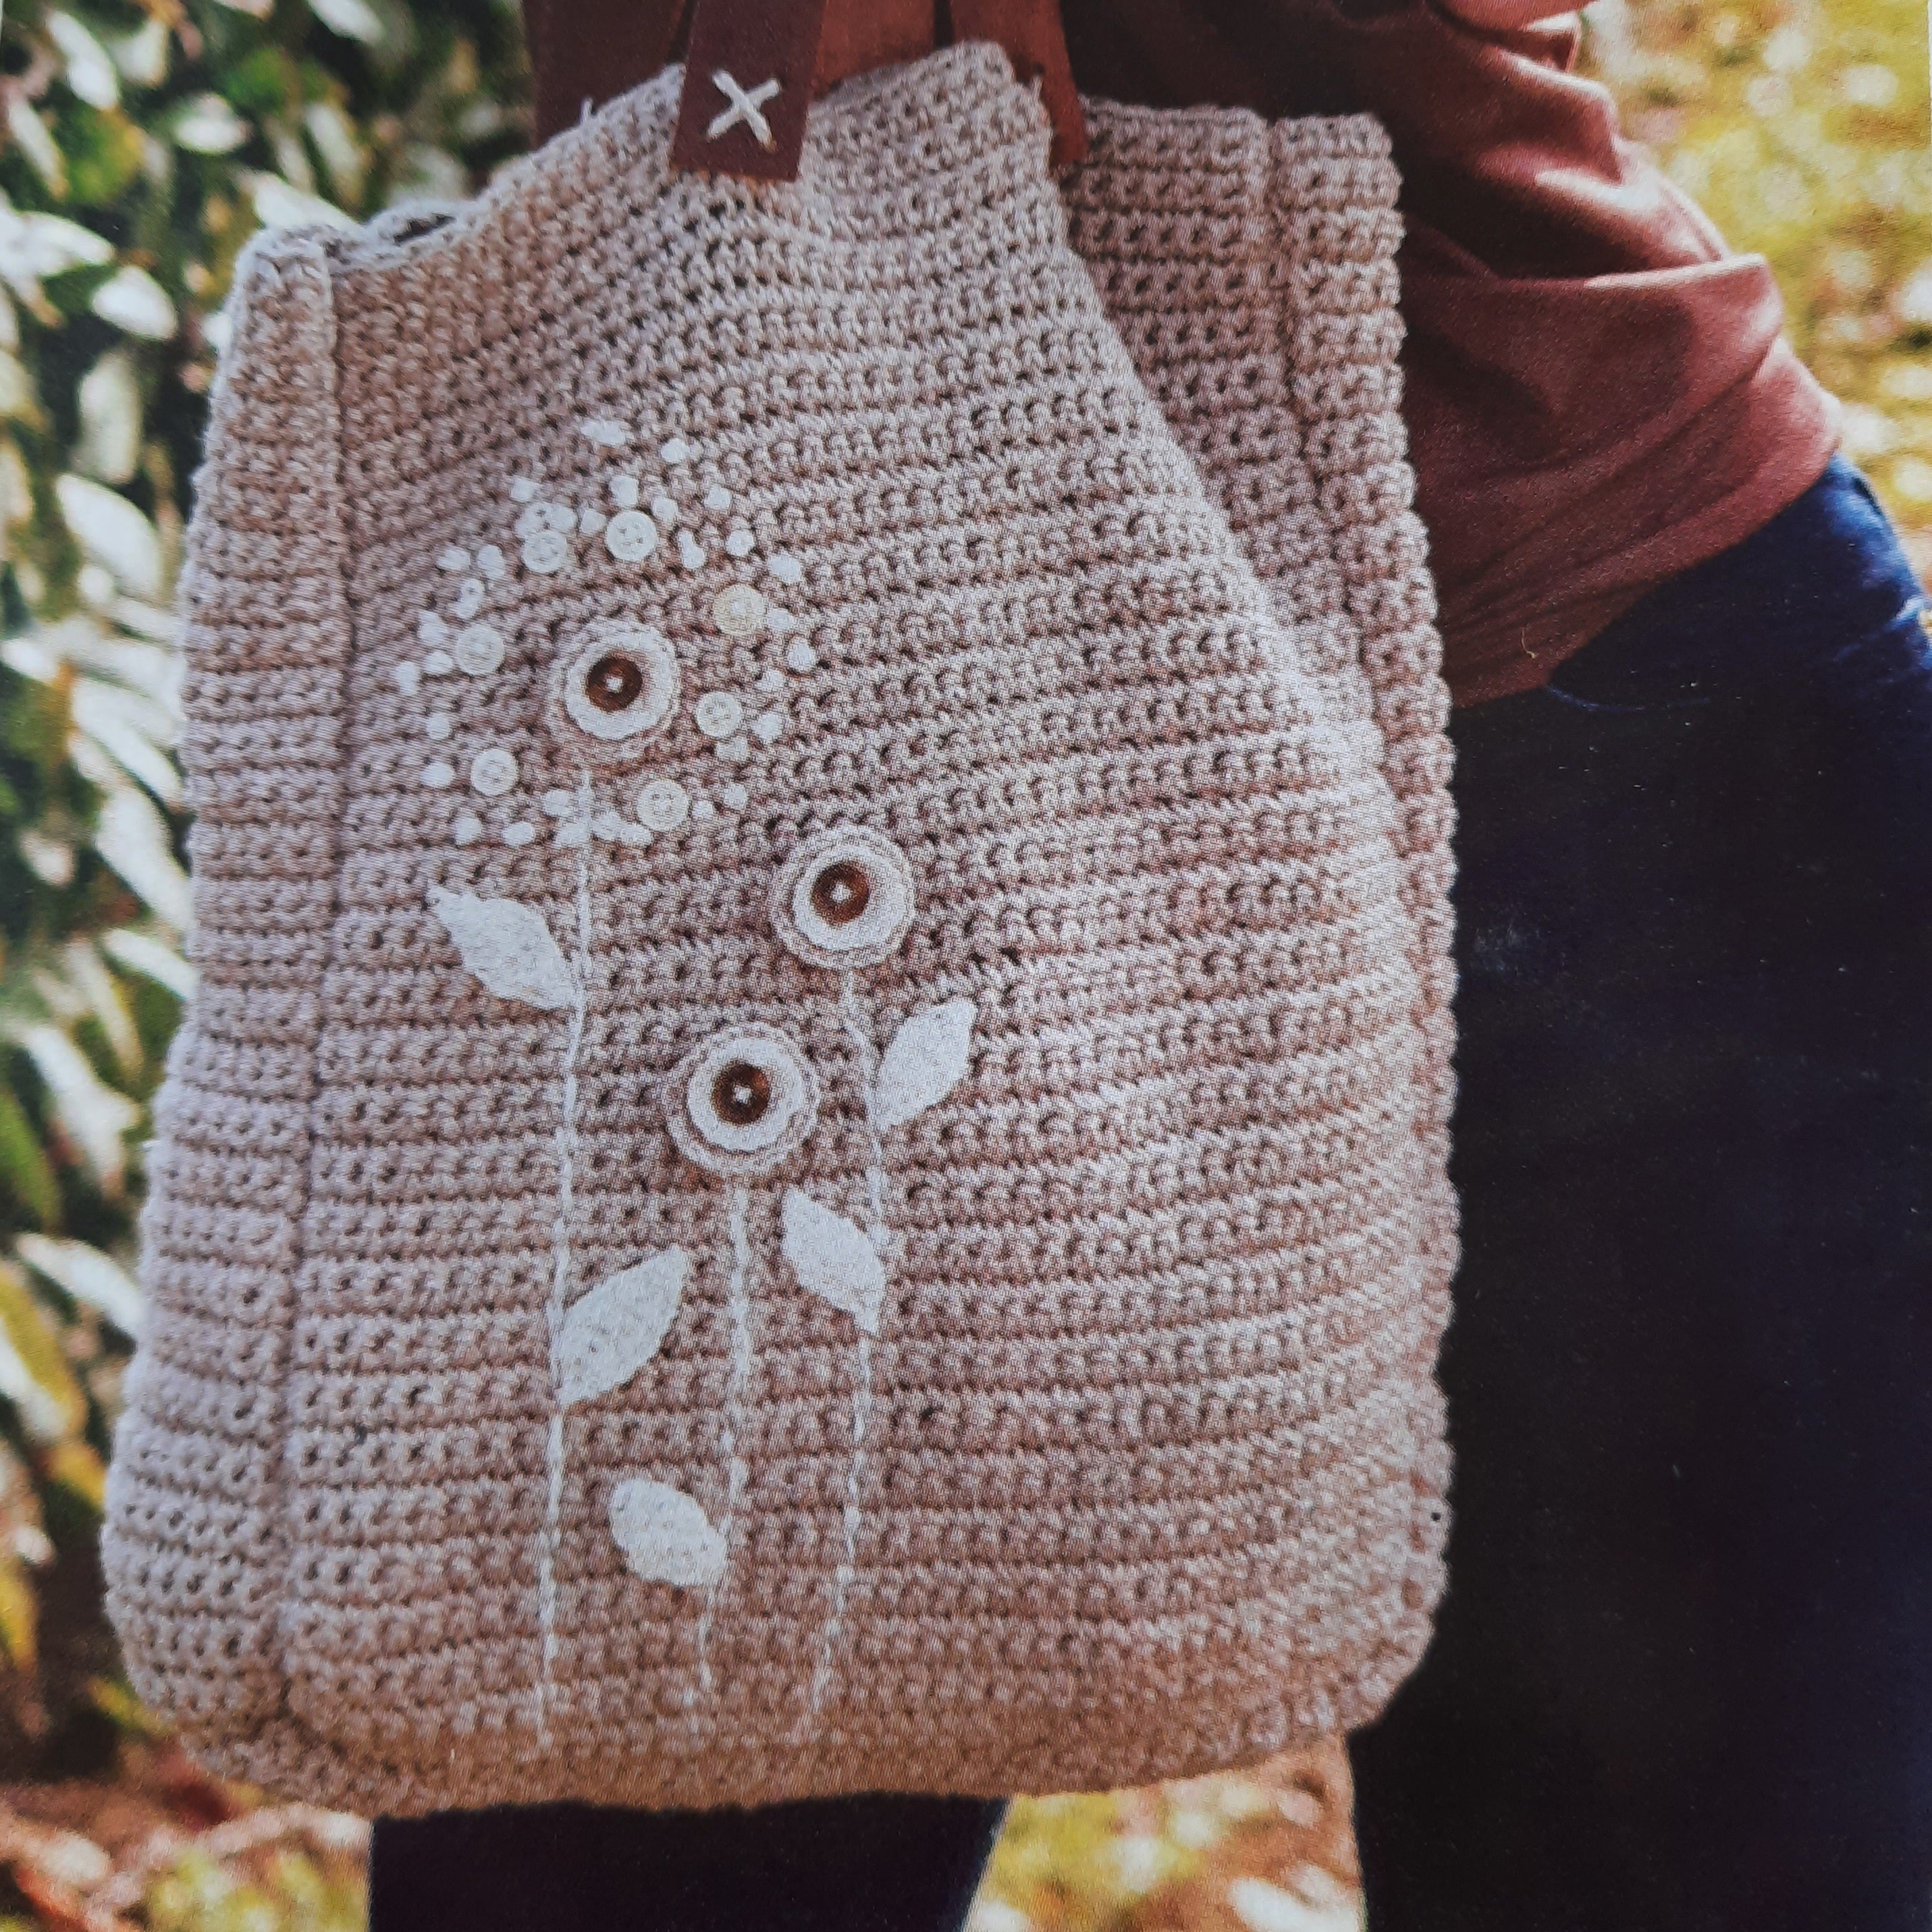 10 Free Crochet Market Tote/ Bag Designs - off the hook for you